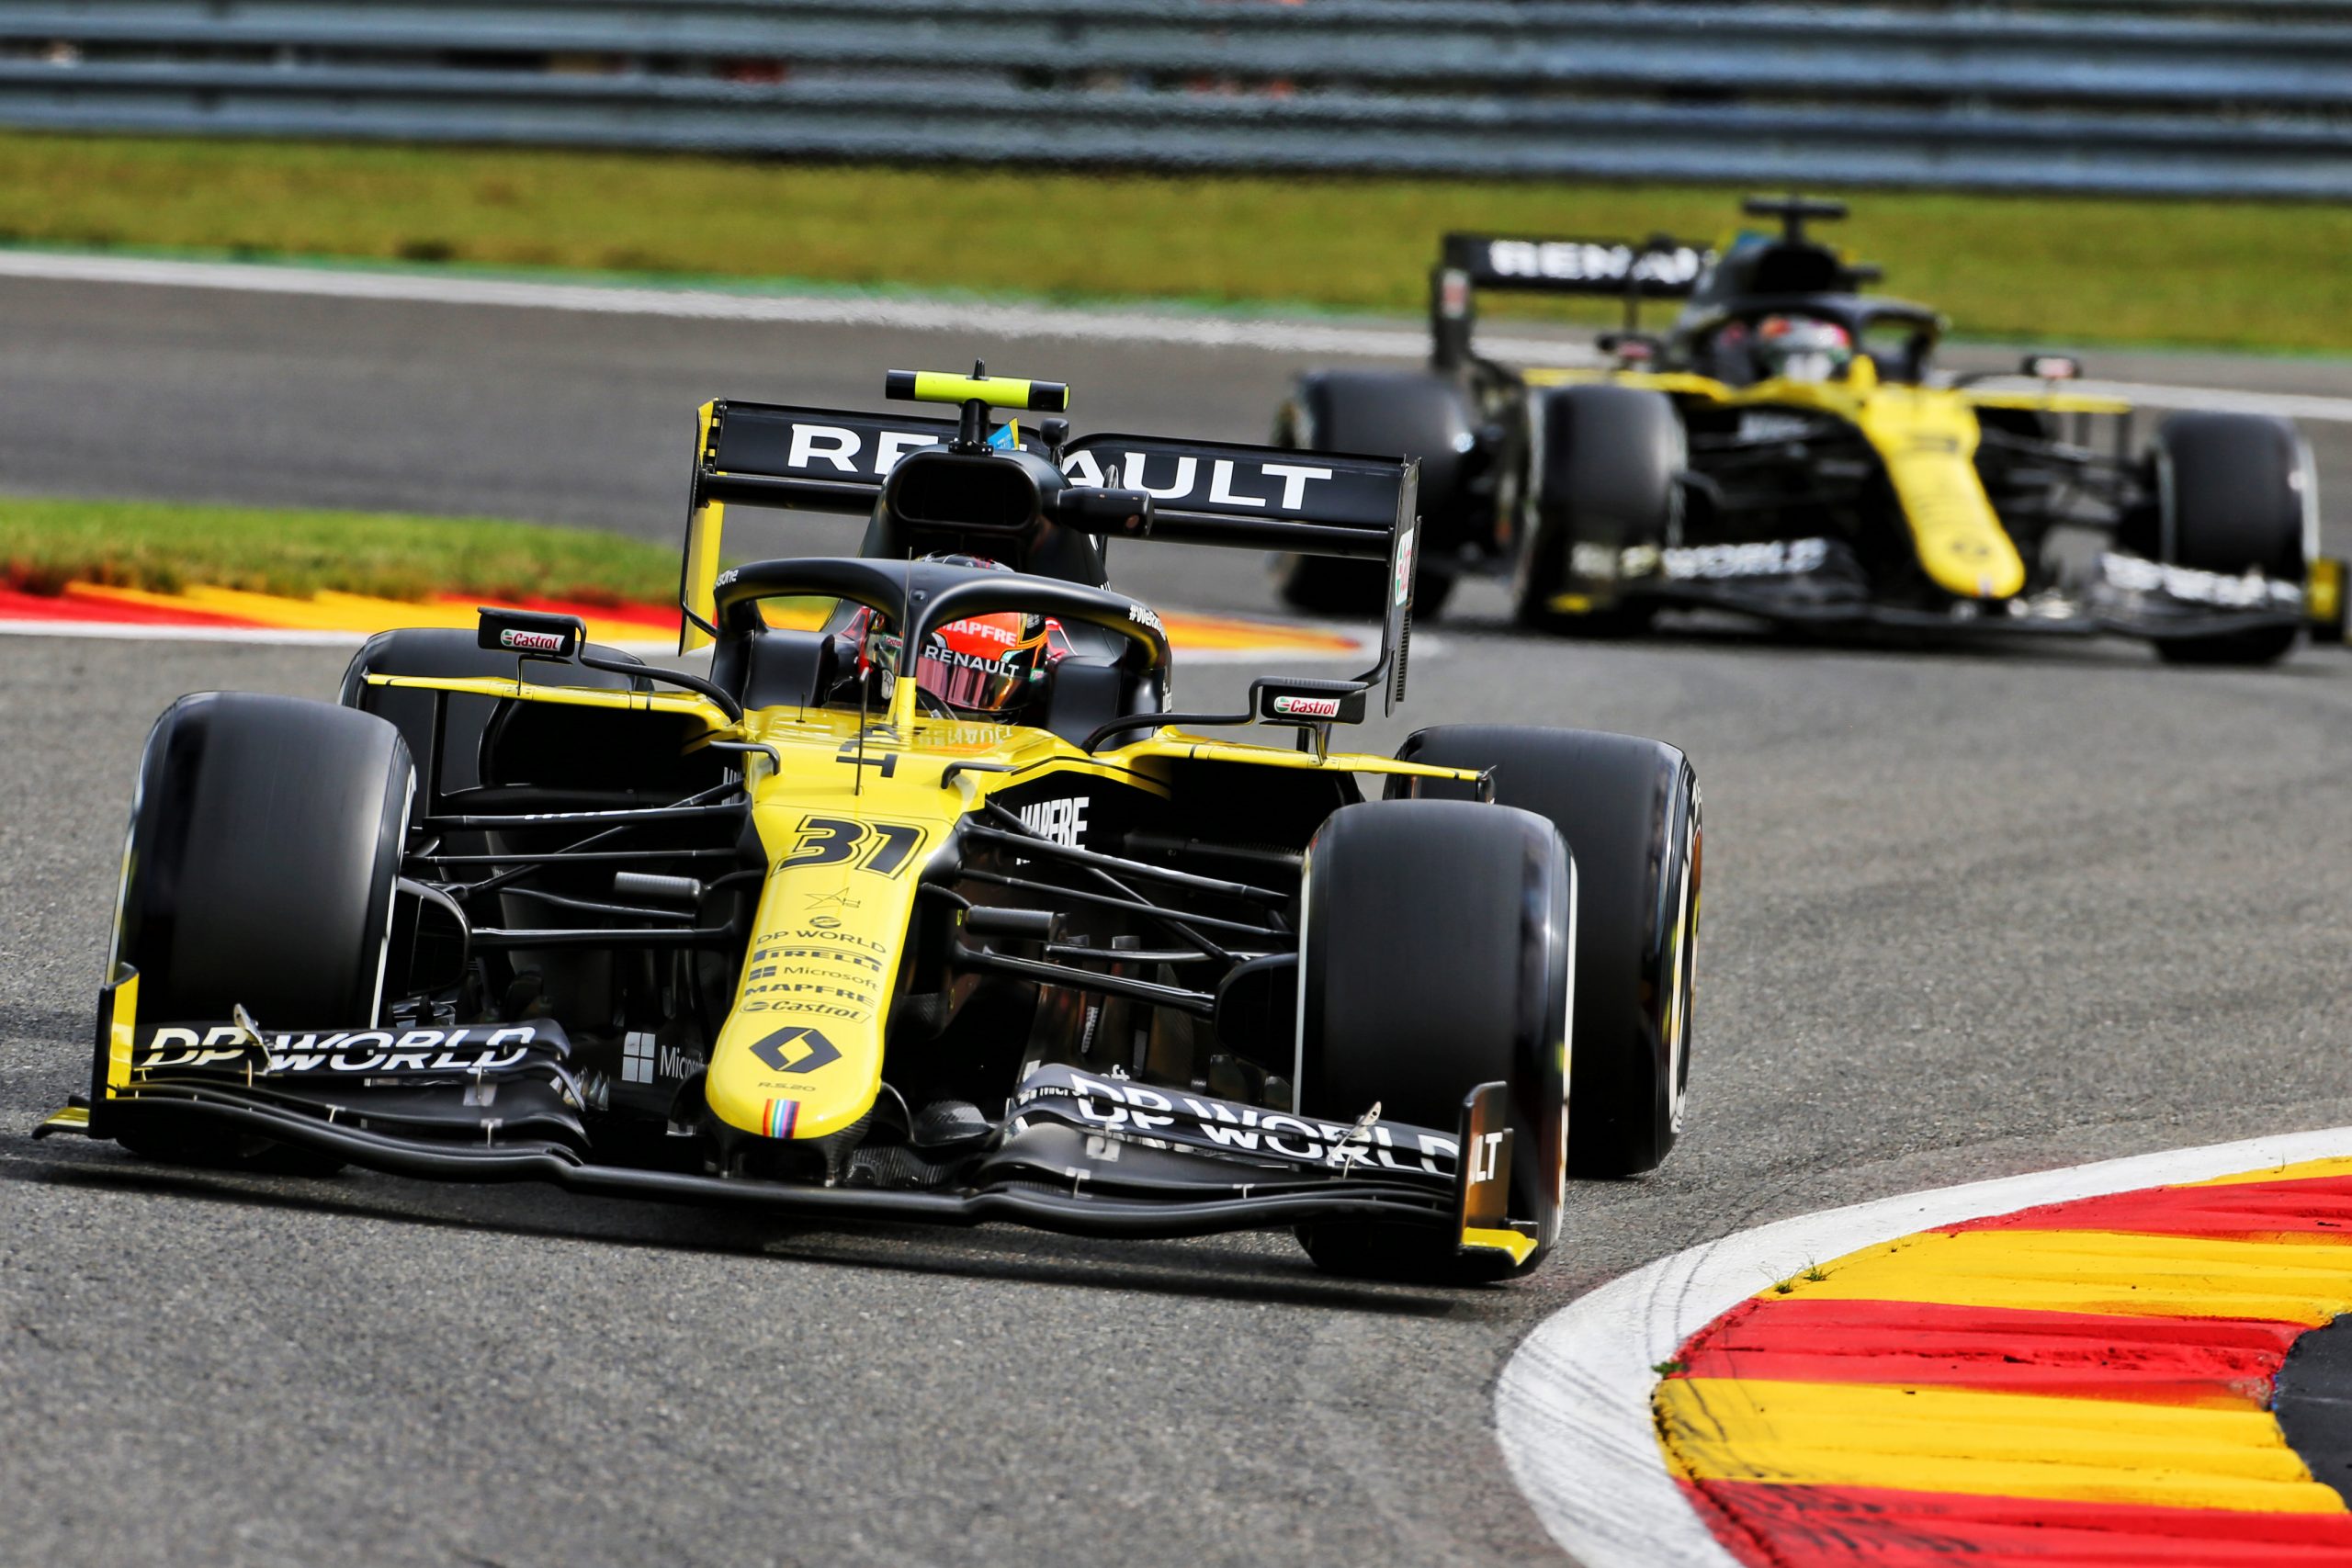 renault-f1-spa-francorchamps